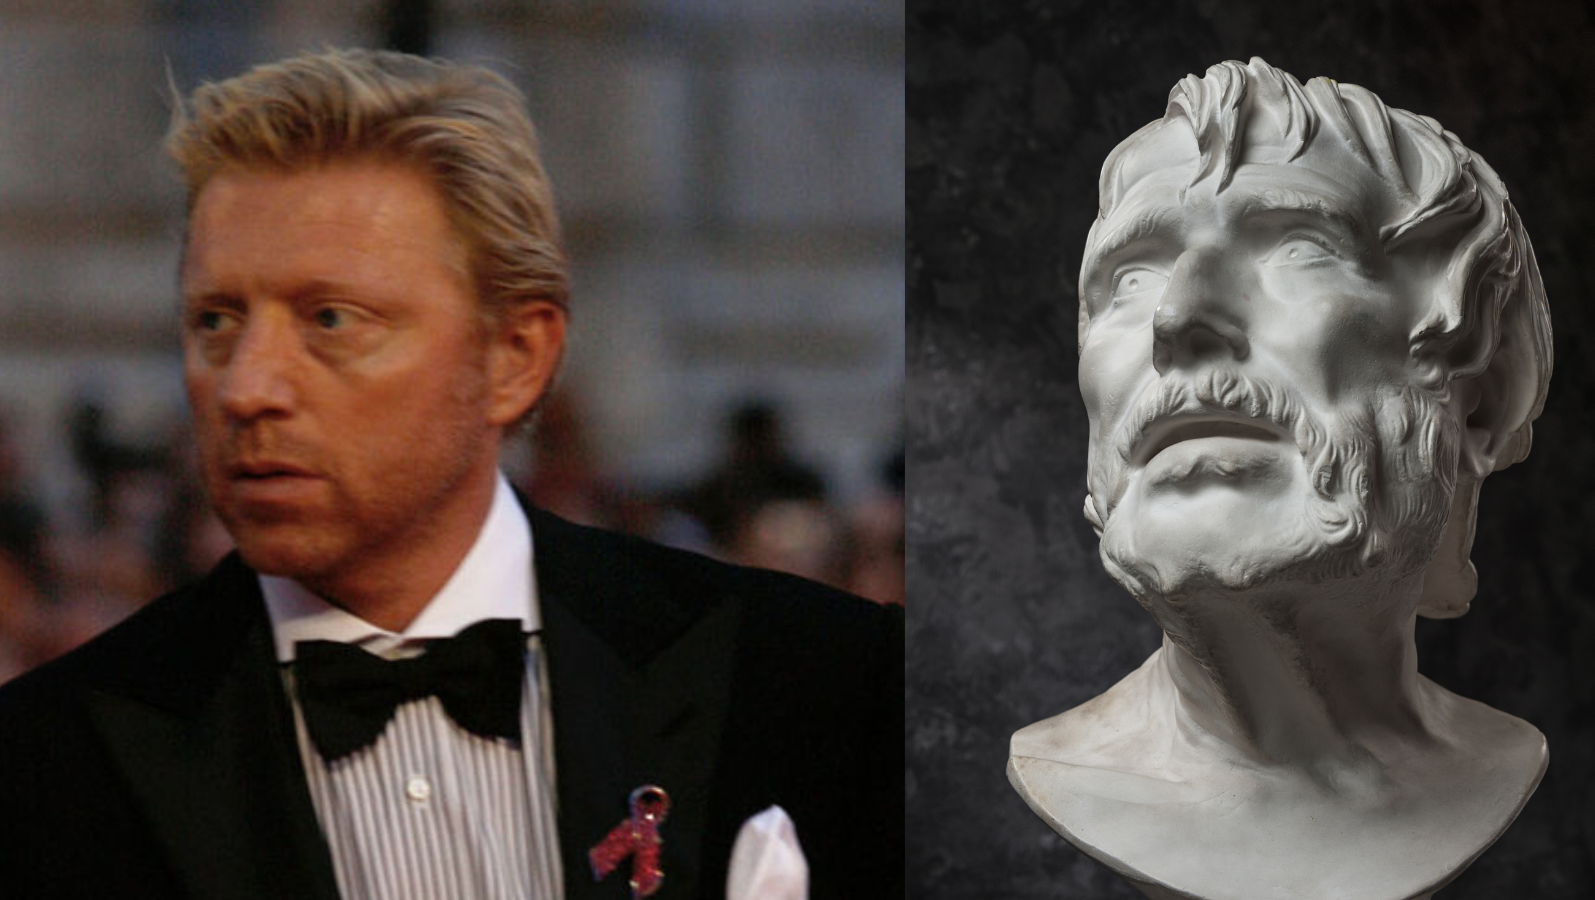 Prison’s turned Boris Becker into a disciple of Stoicism, with a little help from an old rival